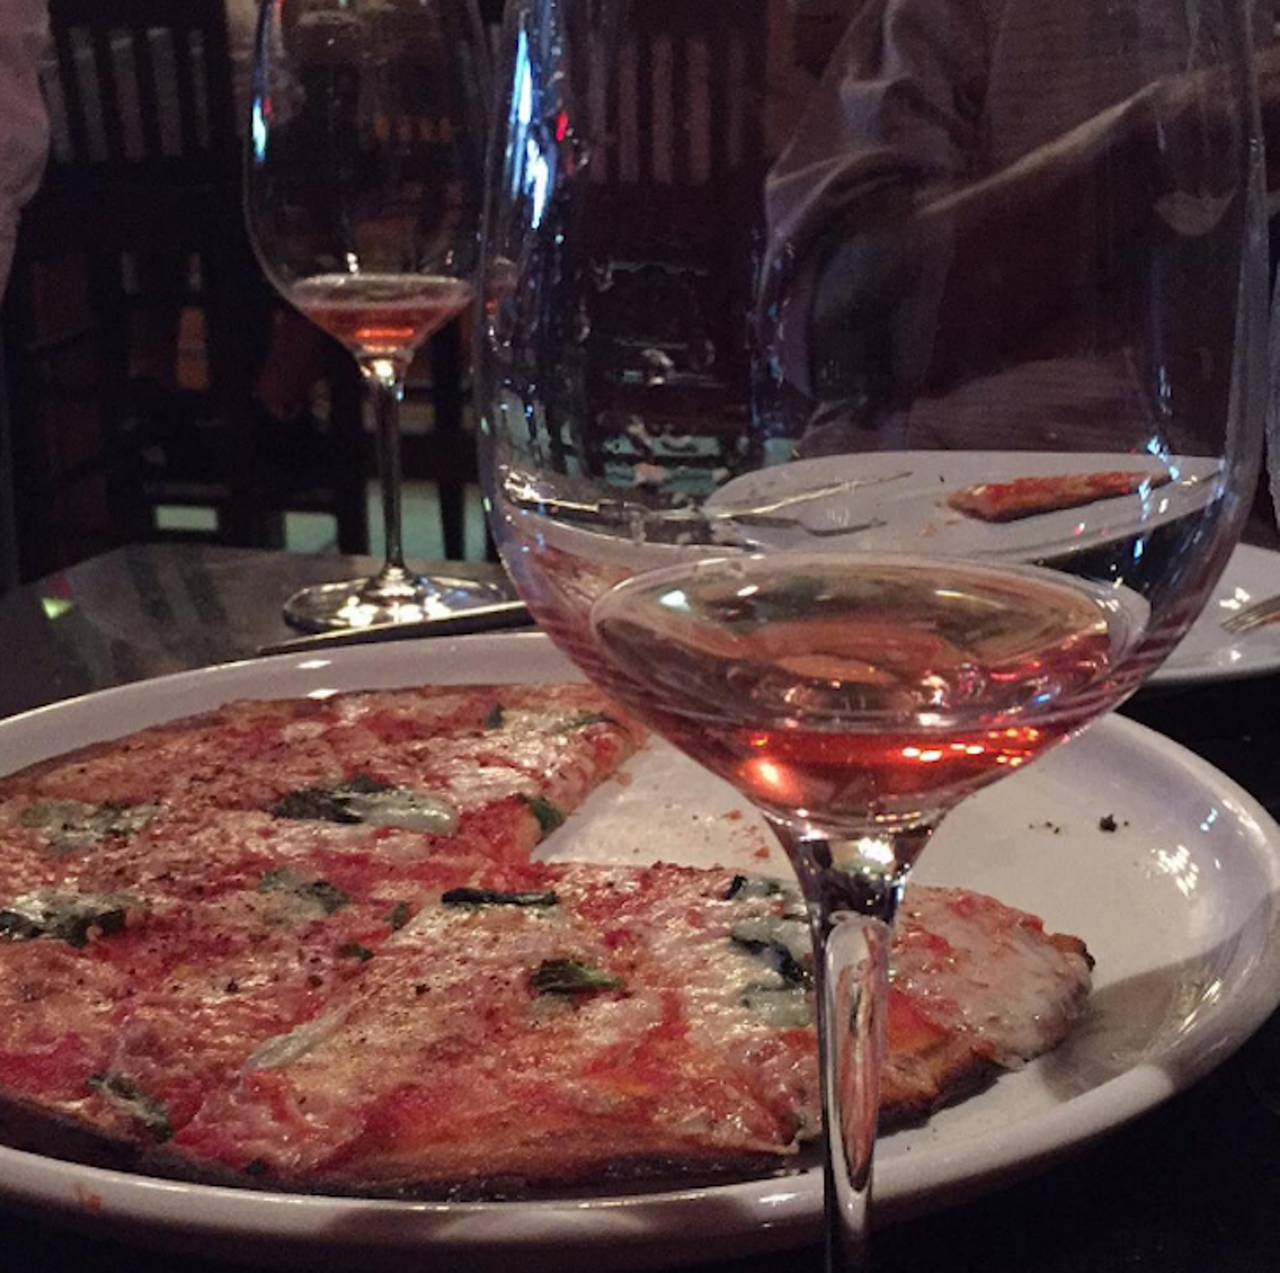 Terramia Wine Bar & Trattoria
1150 Douglas Ave #1040, Altamonte Springs, (407)-774-8466 
Another pizza joint to compliment the wine lover in you, Terramia has a full wine bar and a floor to ceiling wine display to accompany its variety of delectable pizza. 
Photo via olrap/Instagram